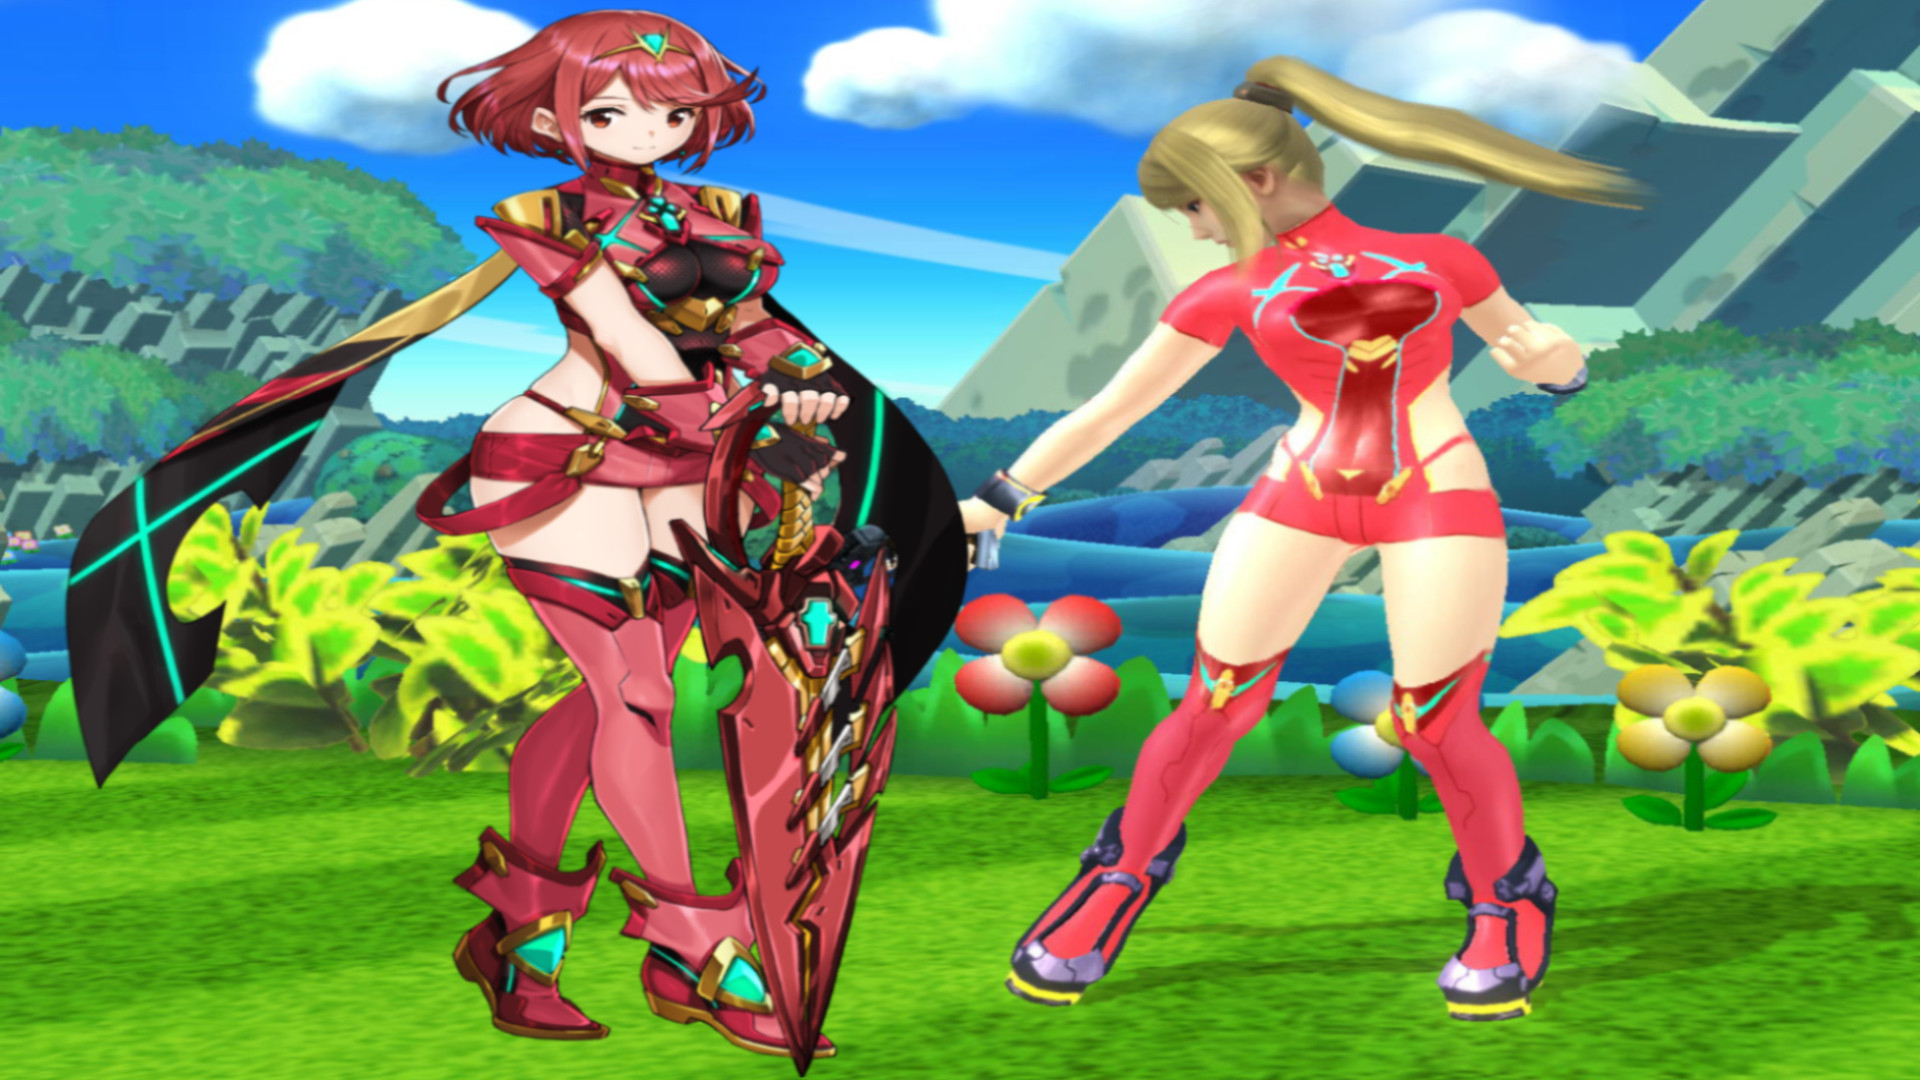 Another recolor for ZSS based in Pyra From Xenoblade 2. 